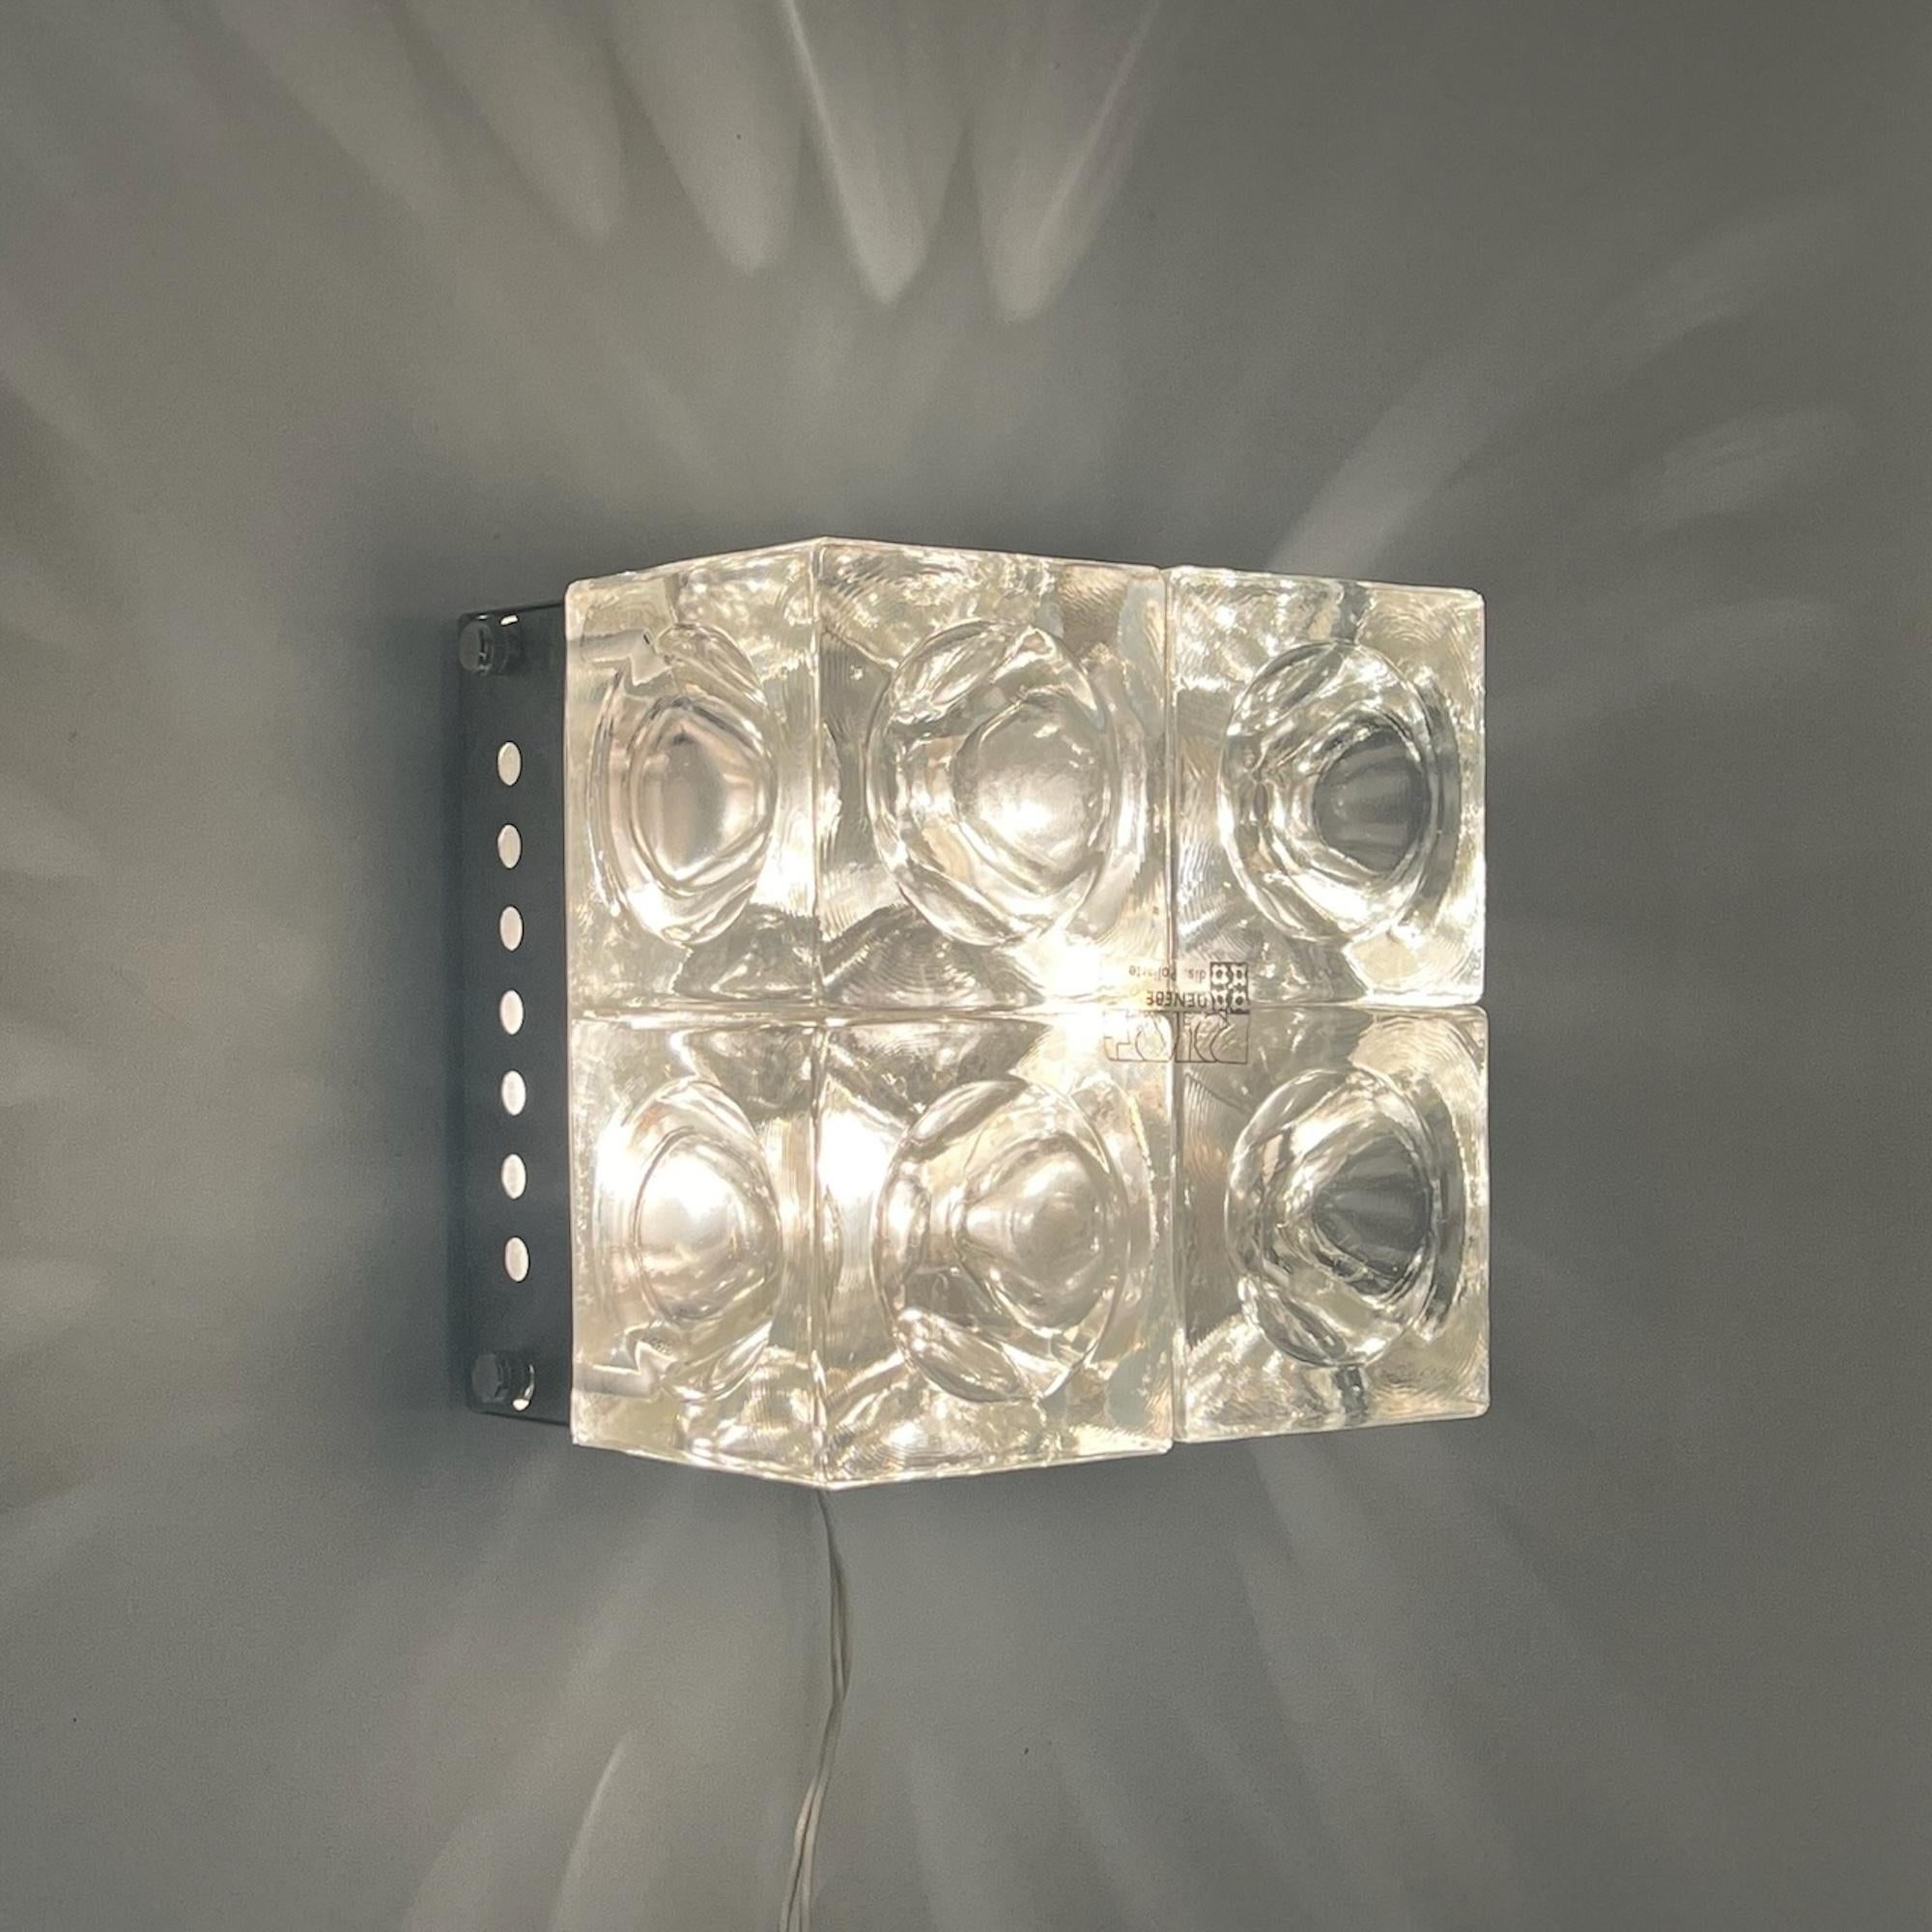 Discover the epitome of 1970s design with the iconic and rare Poliarte lamp, meticulously crafted by master Albano Poli. This masterpiece features four concave bubble glass cubes set in a metal base with era-specific steel screws. Each piece is a